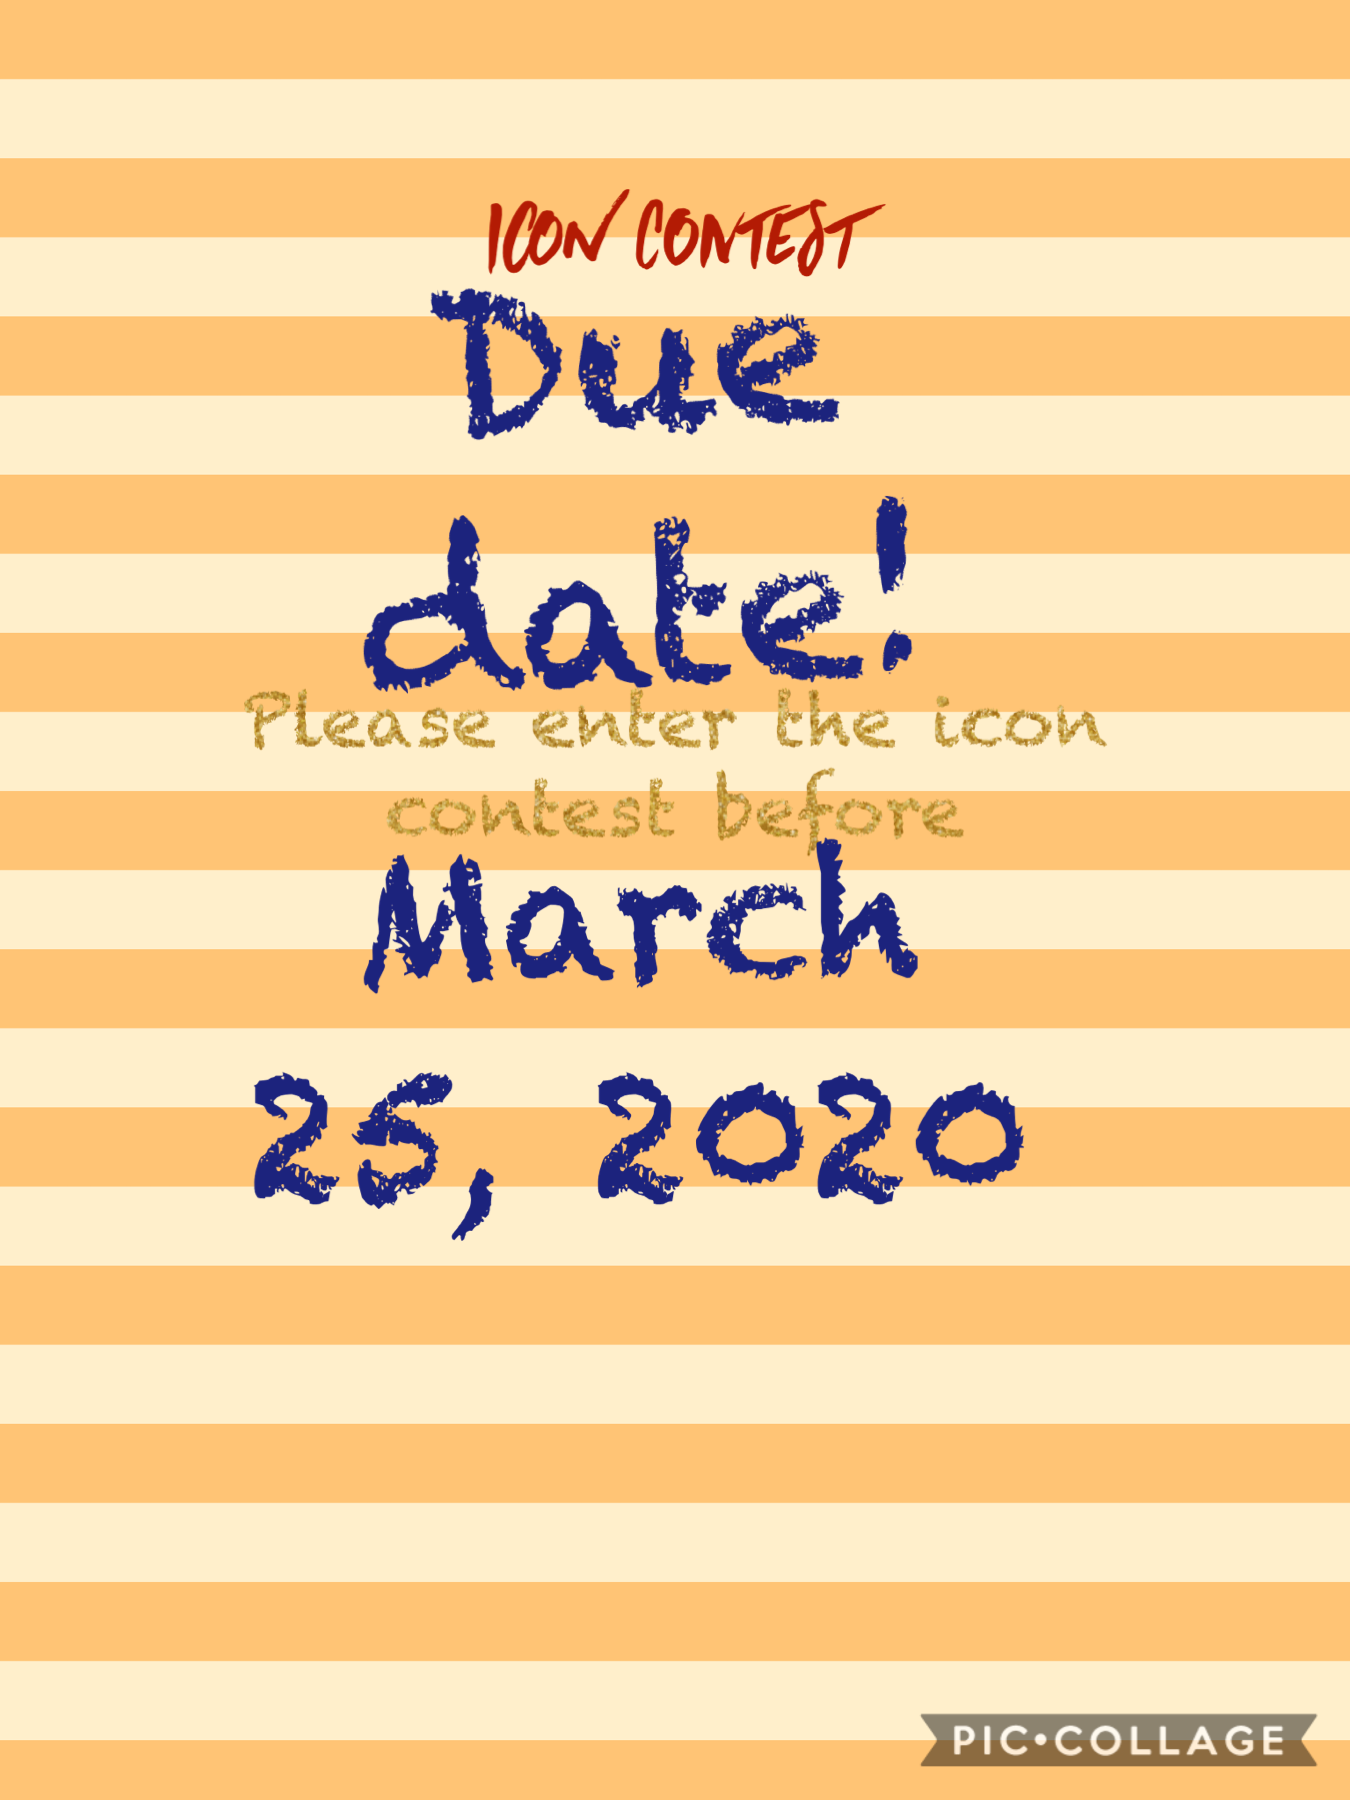 ❤️TAP❤️ 
Due Date = March 25, 2020
You can get a shoutout by guessing what March 25 has to do with Hamilton!